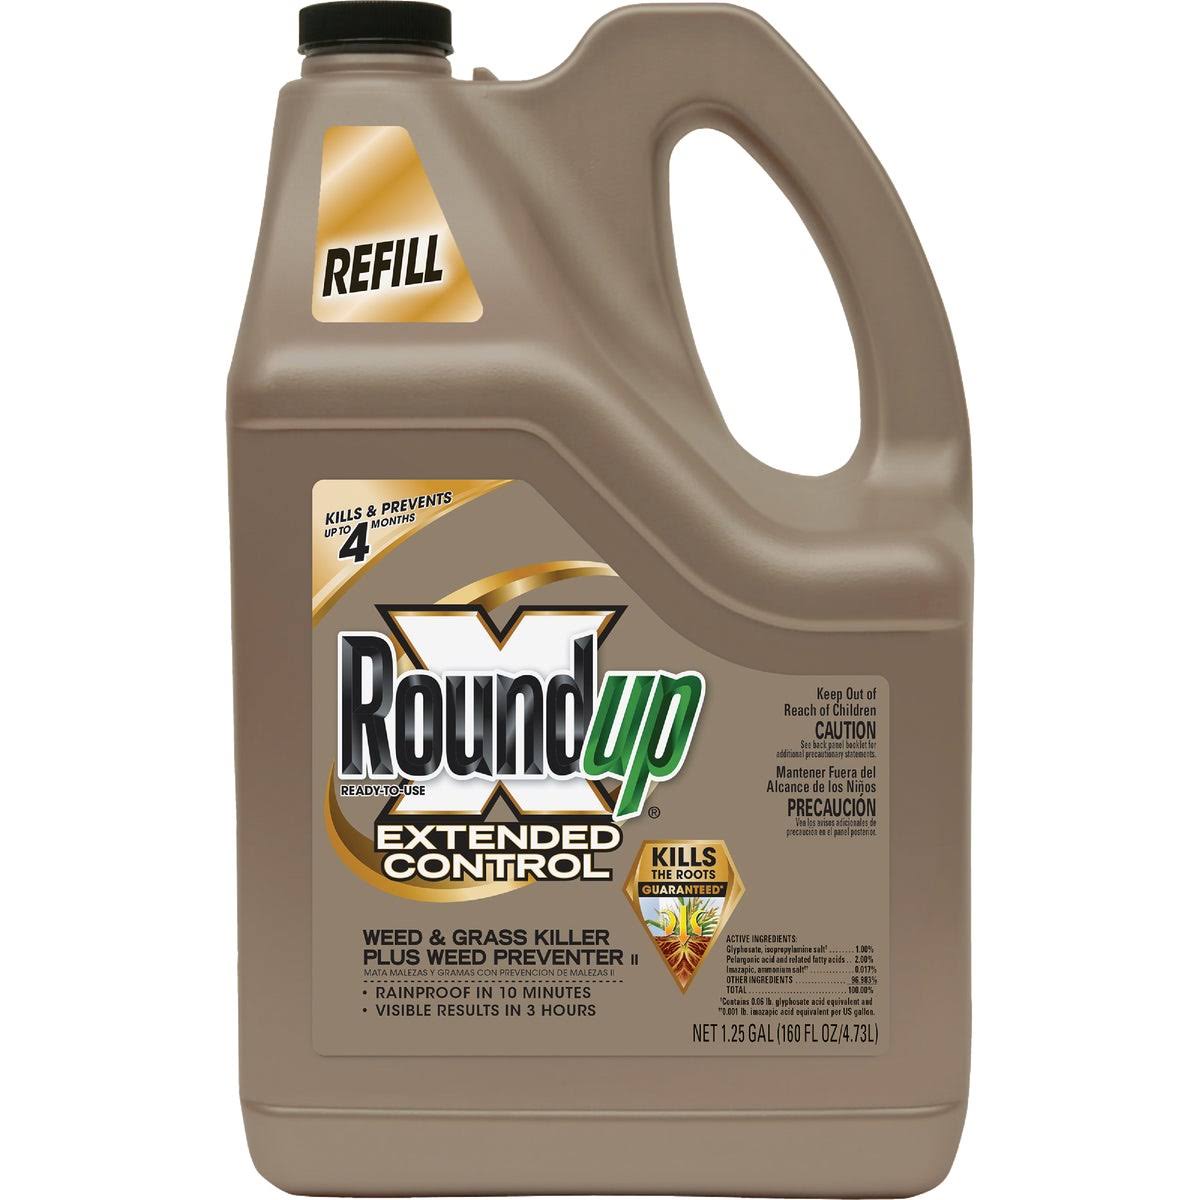 Roundup Extended Control Weed and Grass Killer - 160oz